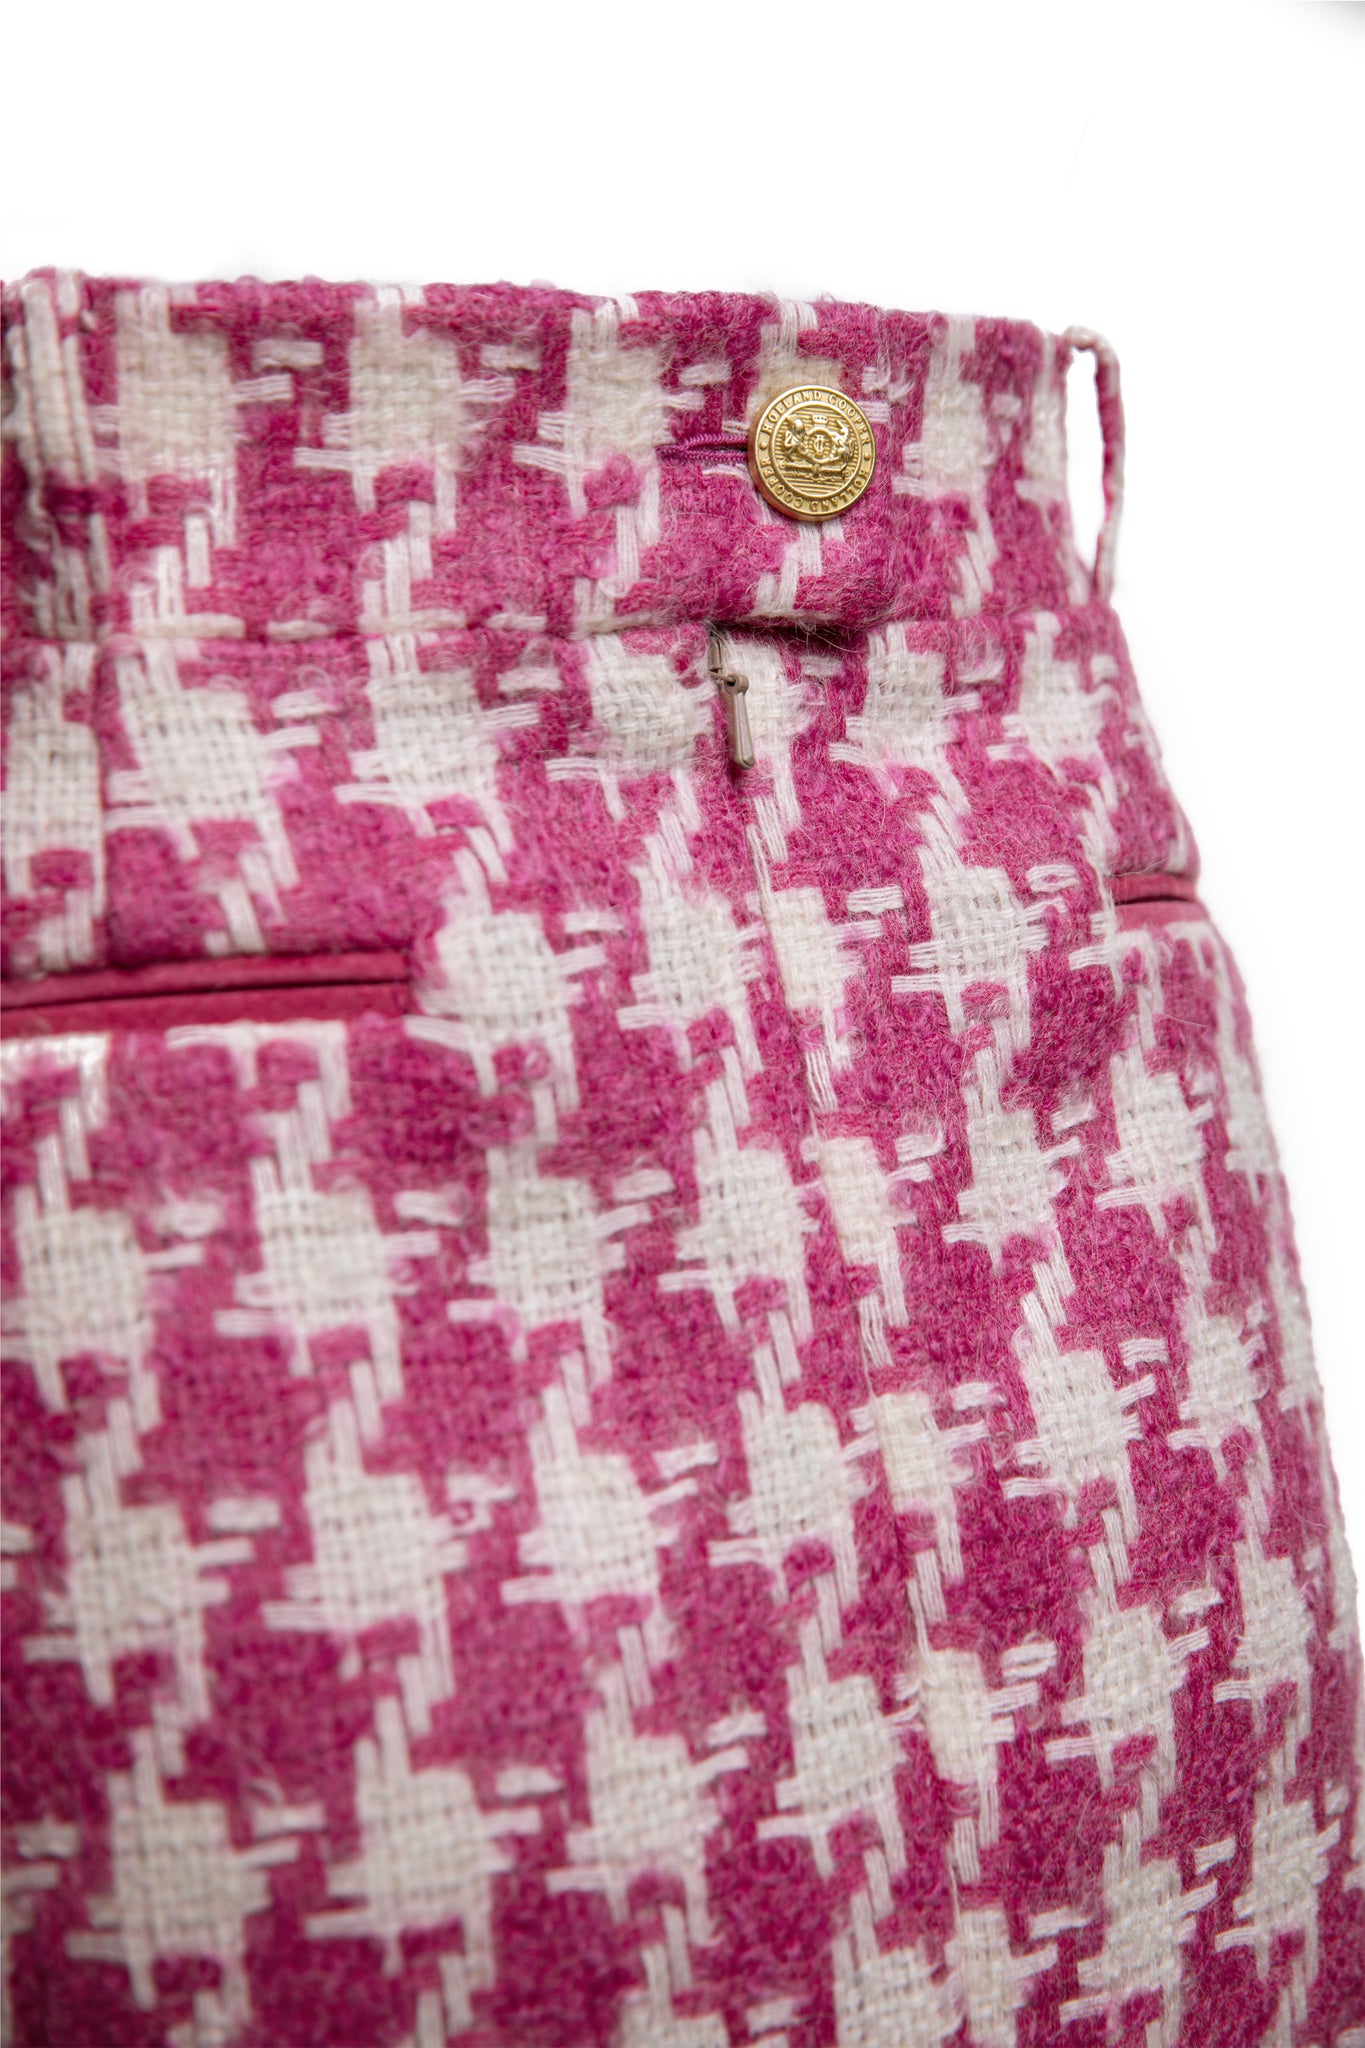 gold button detailing on back waistband of womens pink and white houndstooth wool pencil mini skirt with concealed zip fastening on centre back and gold rivets down front